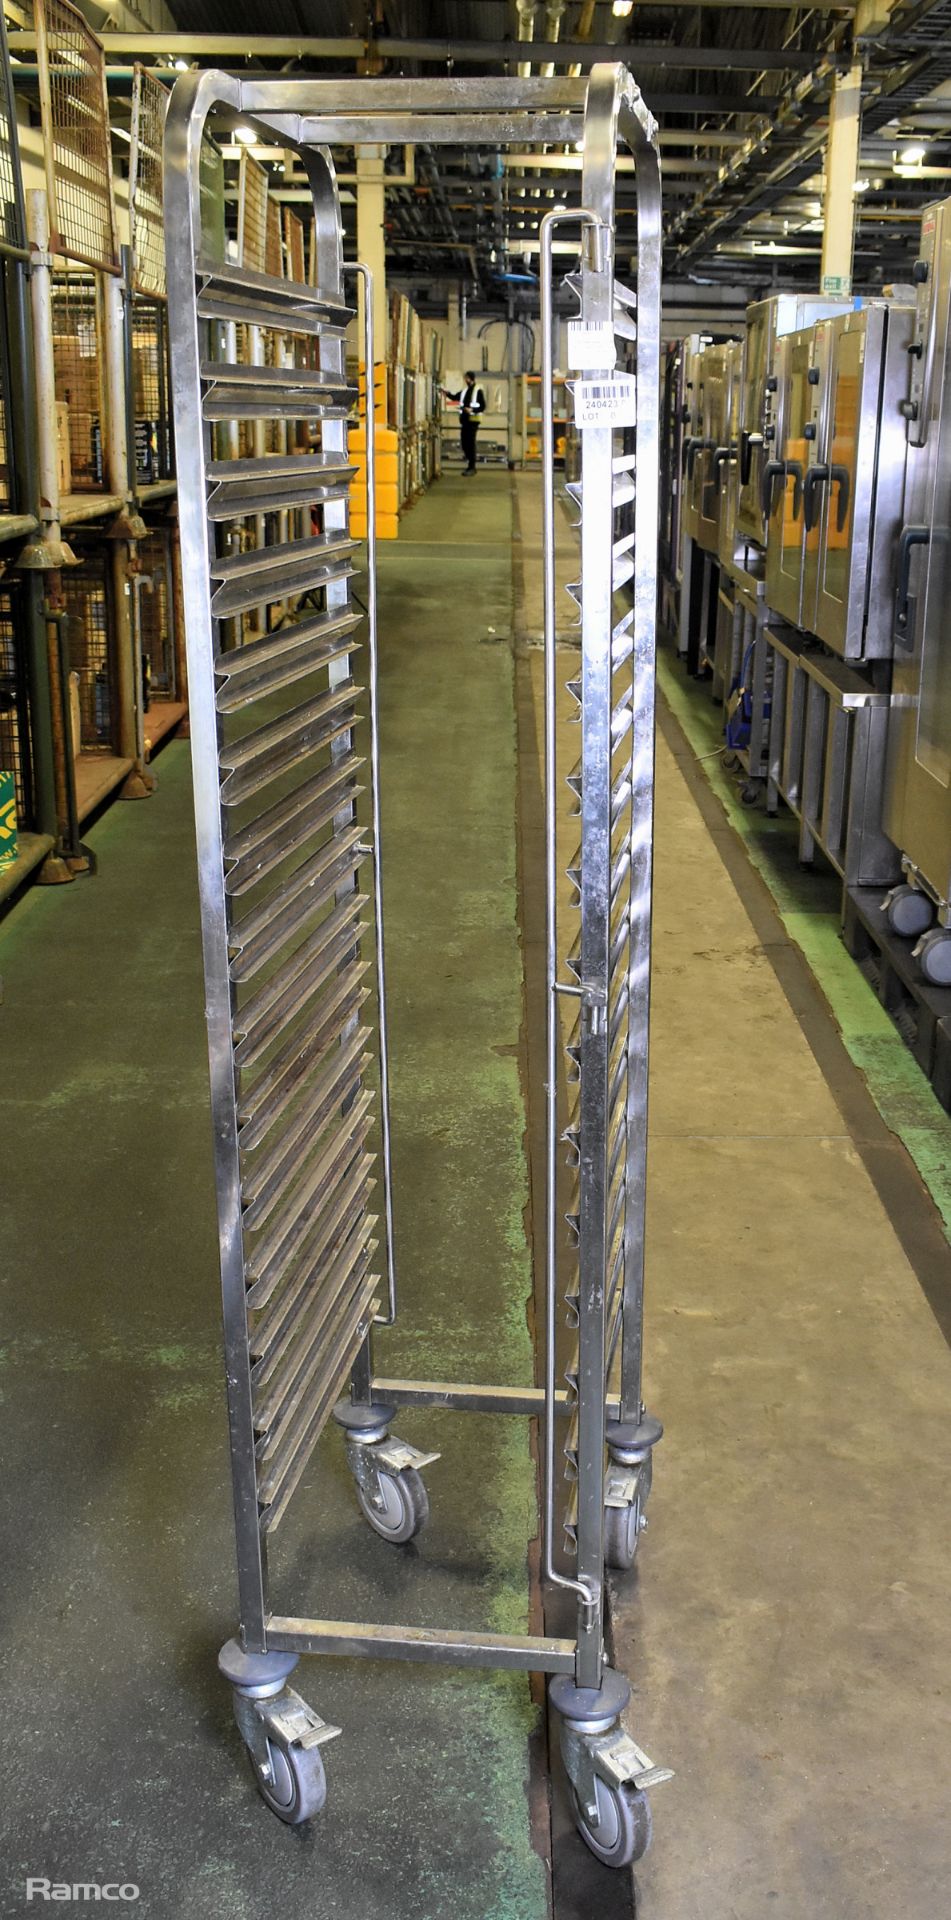 Stainless steel 15 tier tray/rack trolley - L 650 x W 450 x H 1750mm